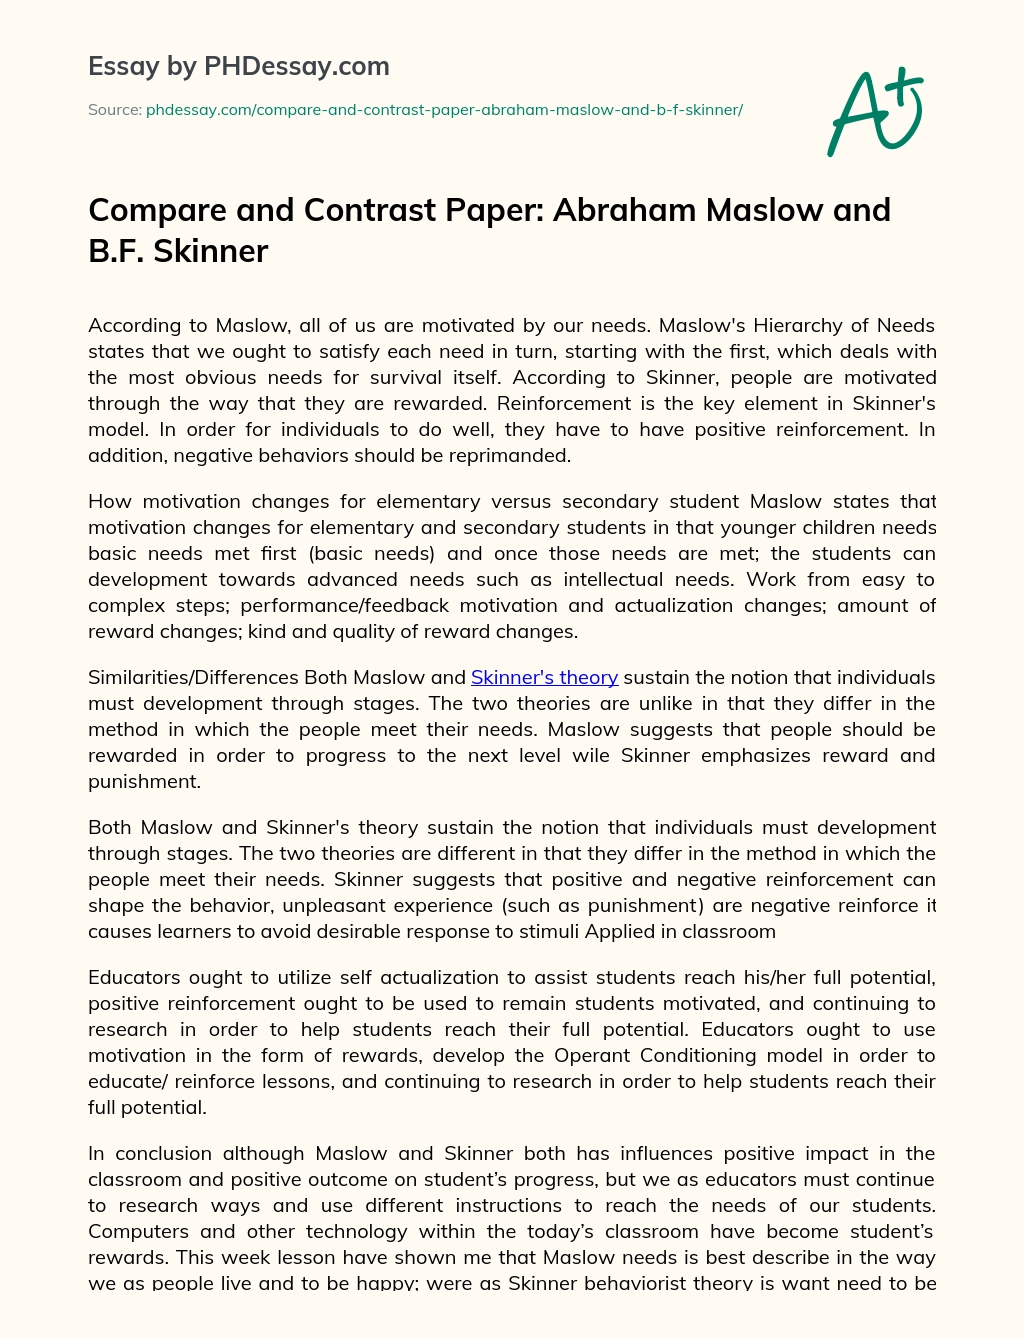 Compare and Contrast Paper: Abraham Maslow and B.F. Skinner essay